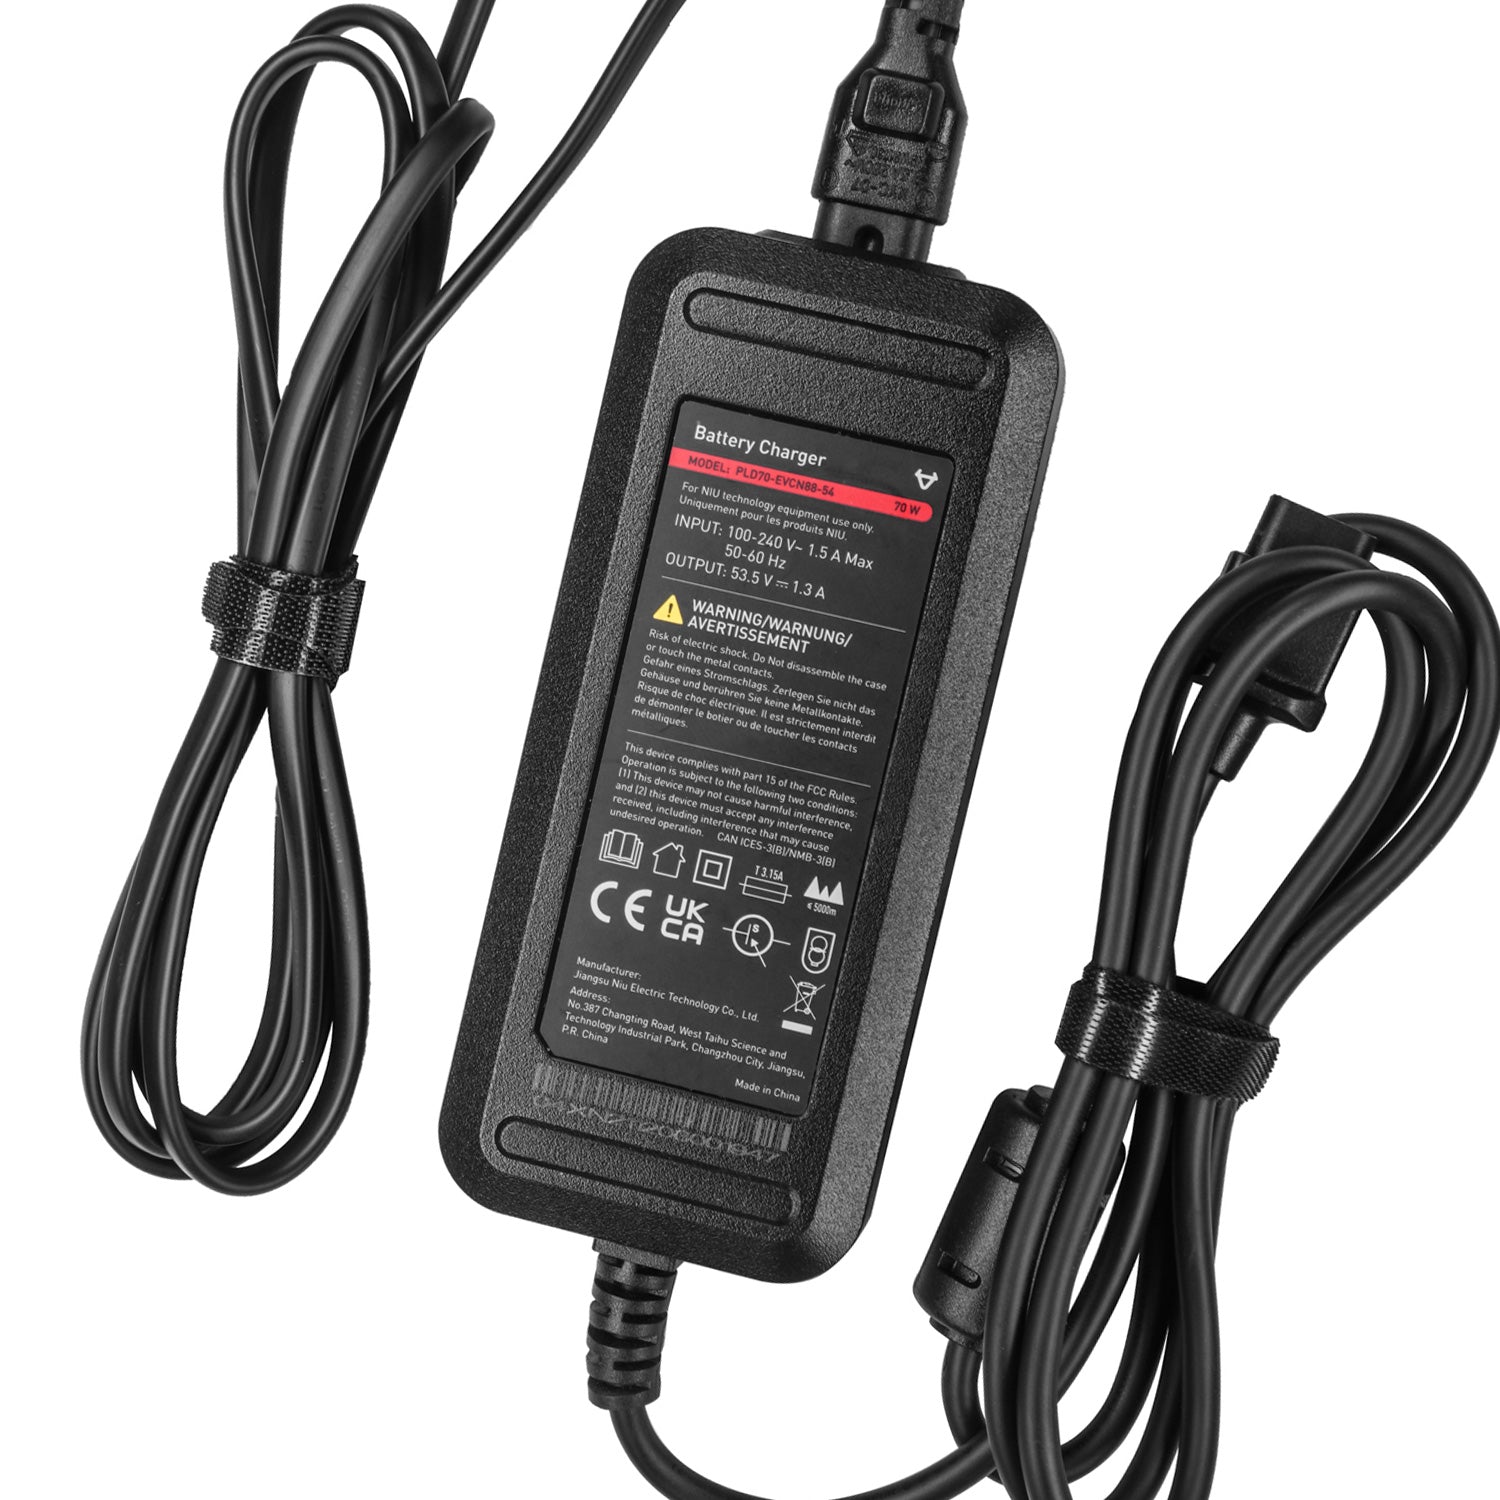 KQi2 Pro Charger